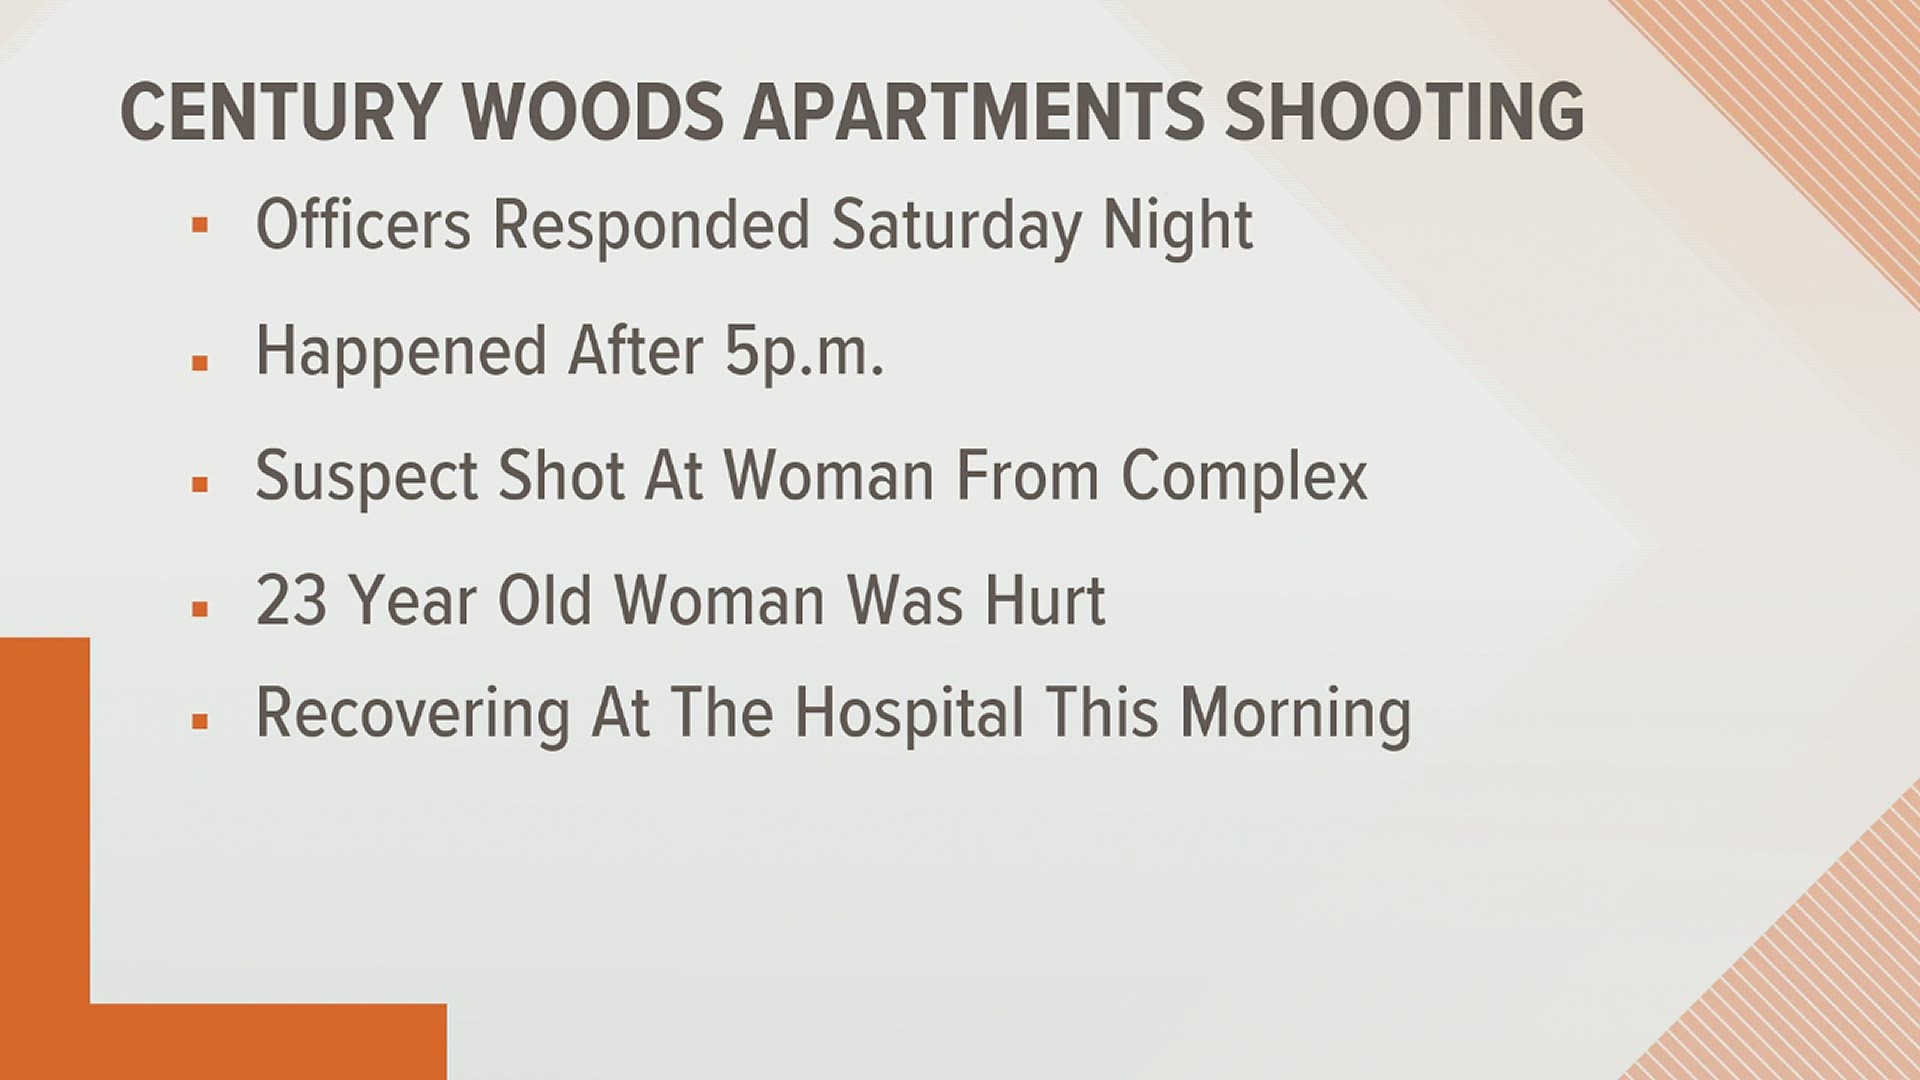 Rock Island Police say it happened just after 5 p.m. at the Century Woods Apartments.